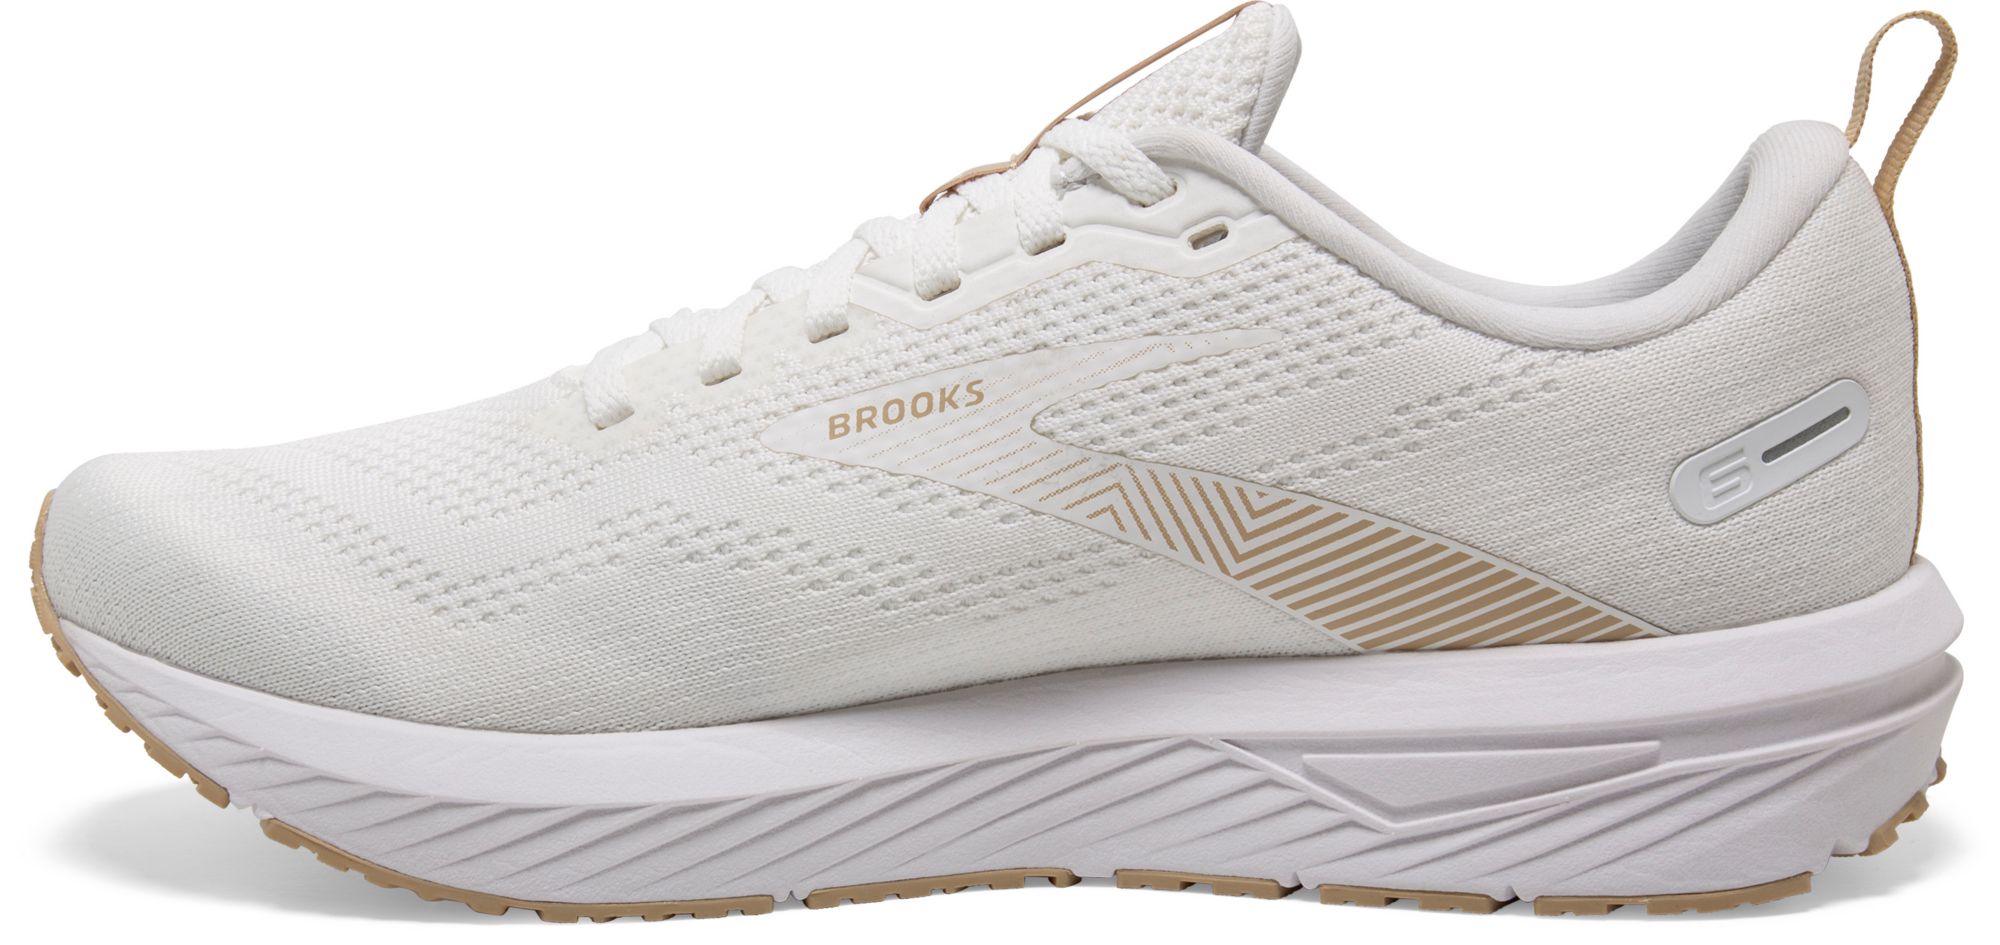 Brooks Revel  Curbside Pickup Available at DICK'S